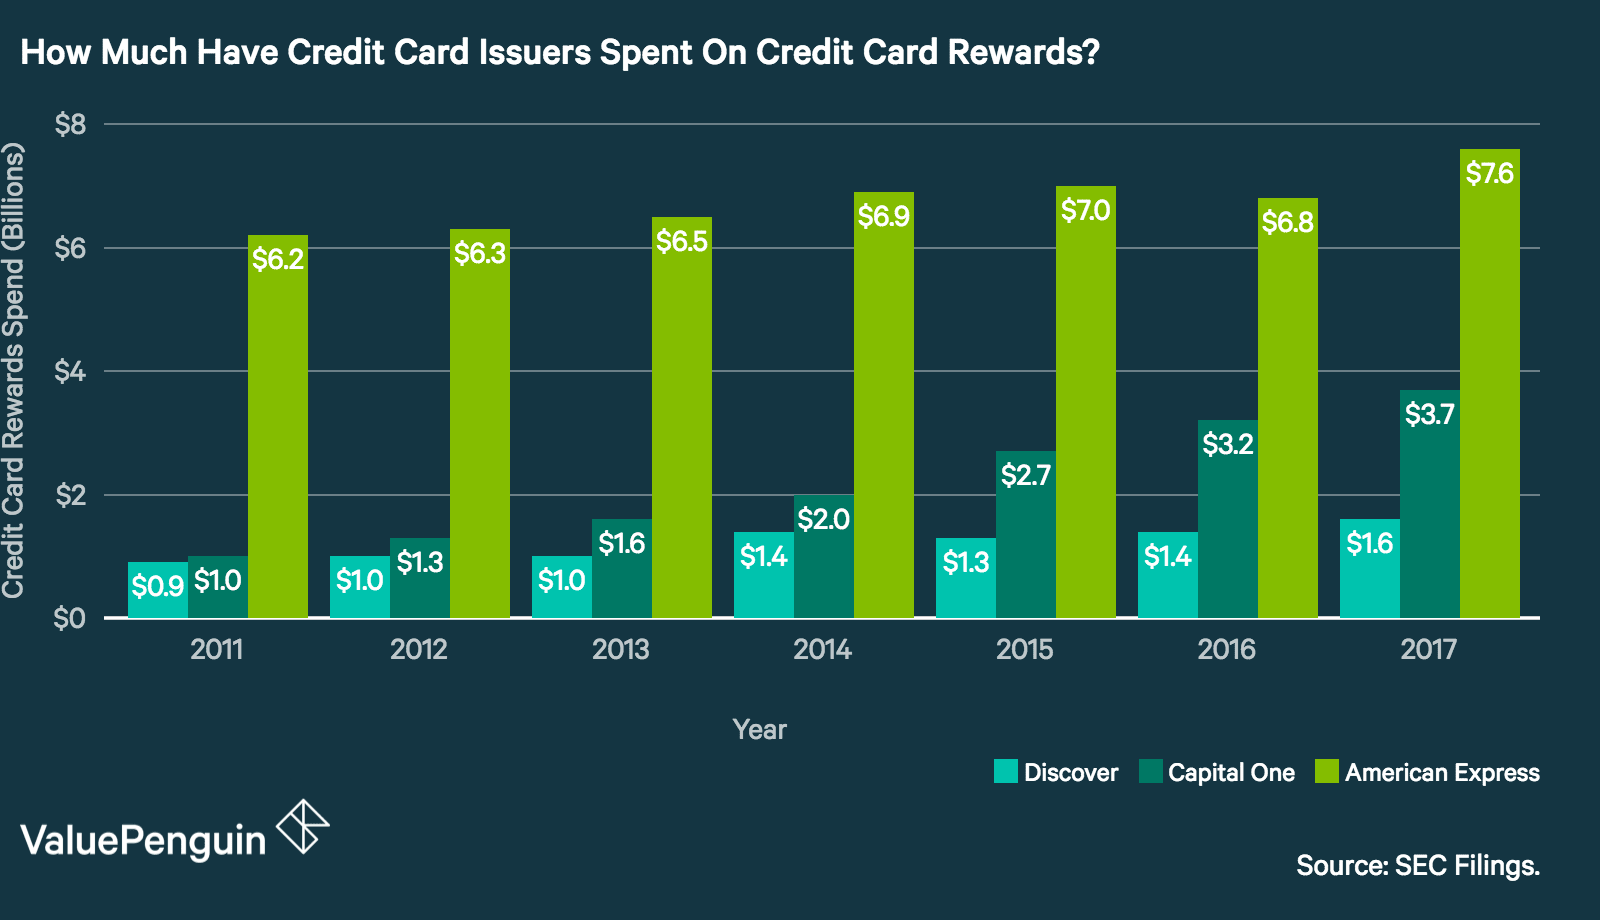 How much have credit card issuers spent on credit card rewards